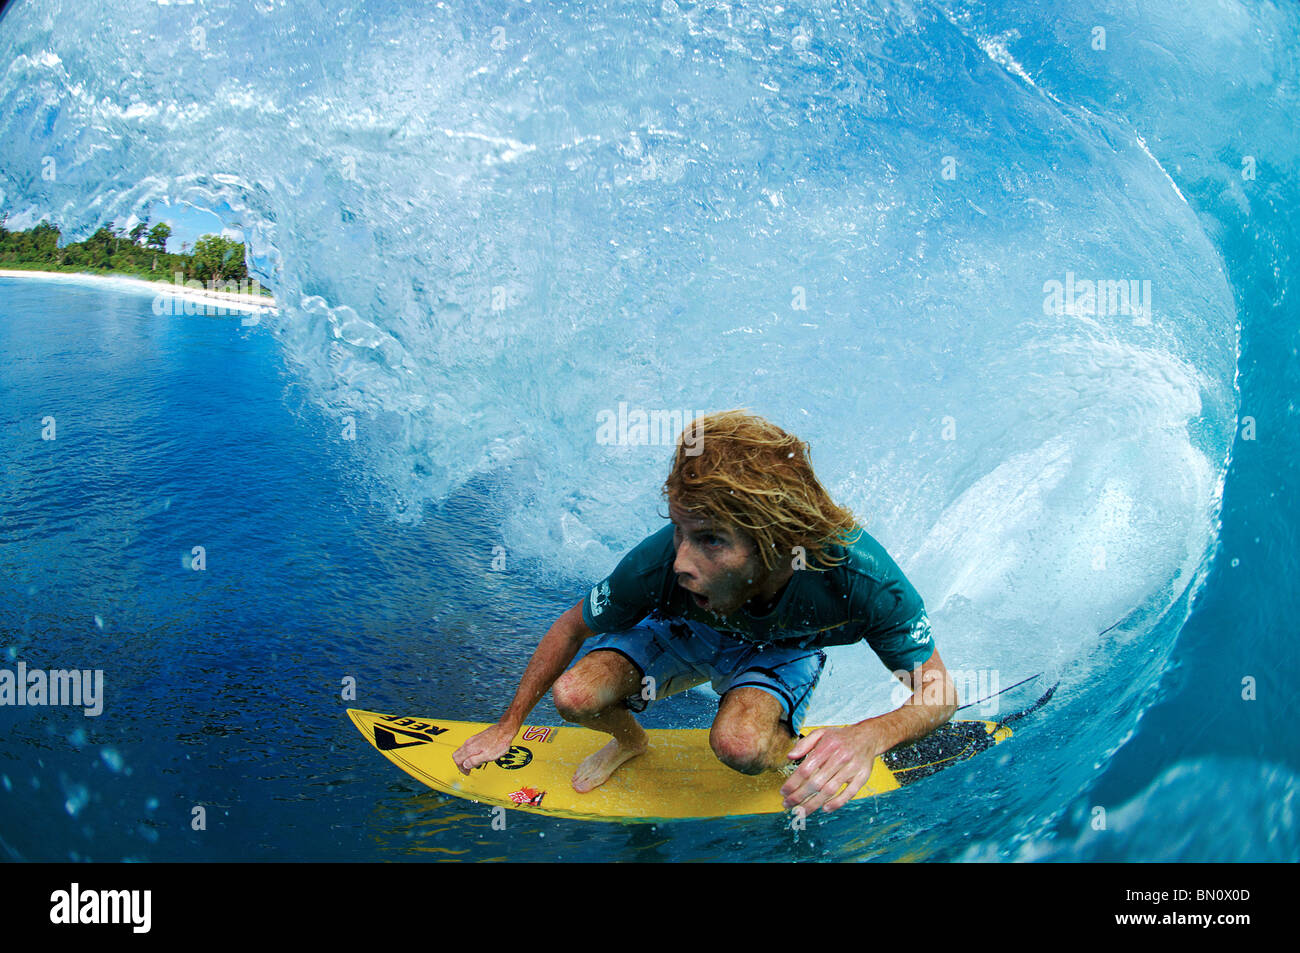 Surfer in the tube of large wave Stock Photo